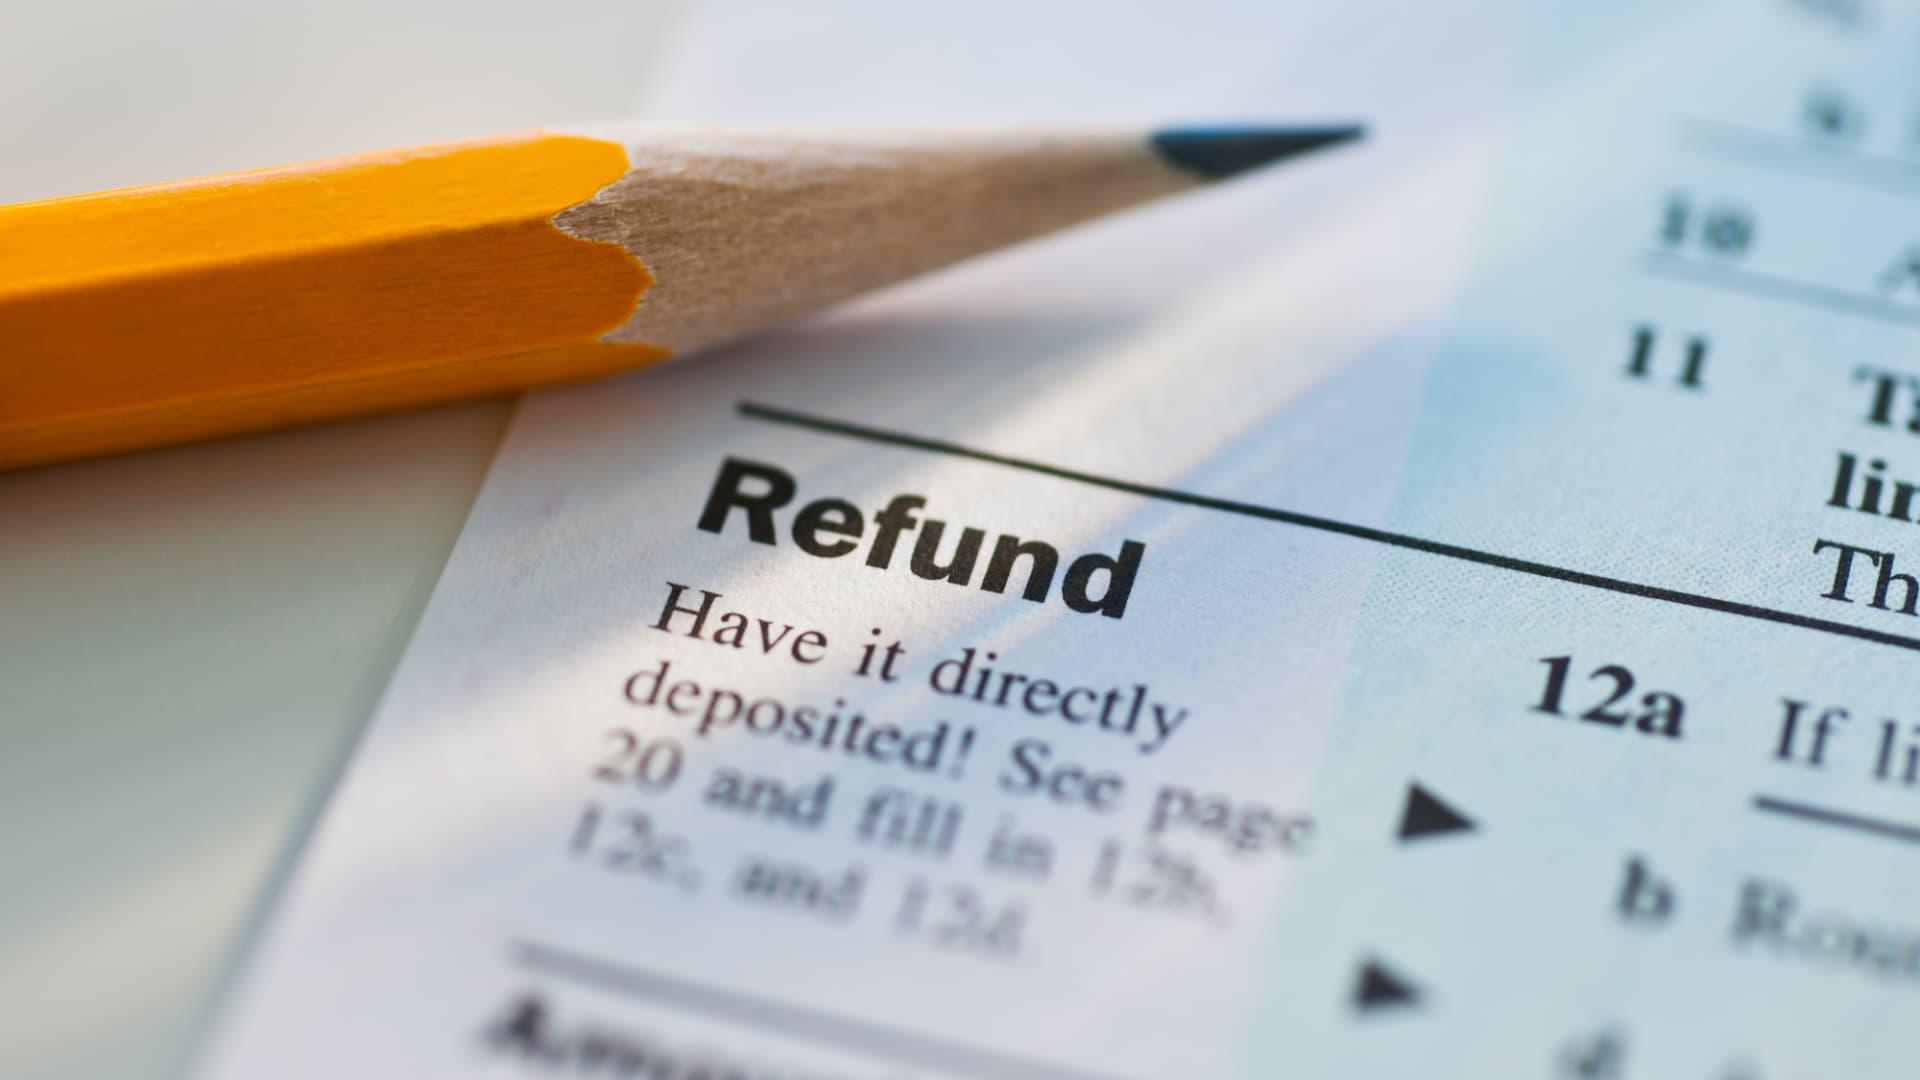 46% of taxpayers plan to save their refunds this year